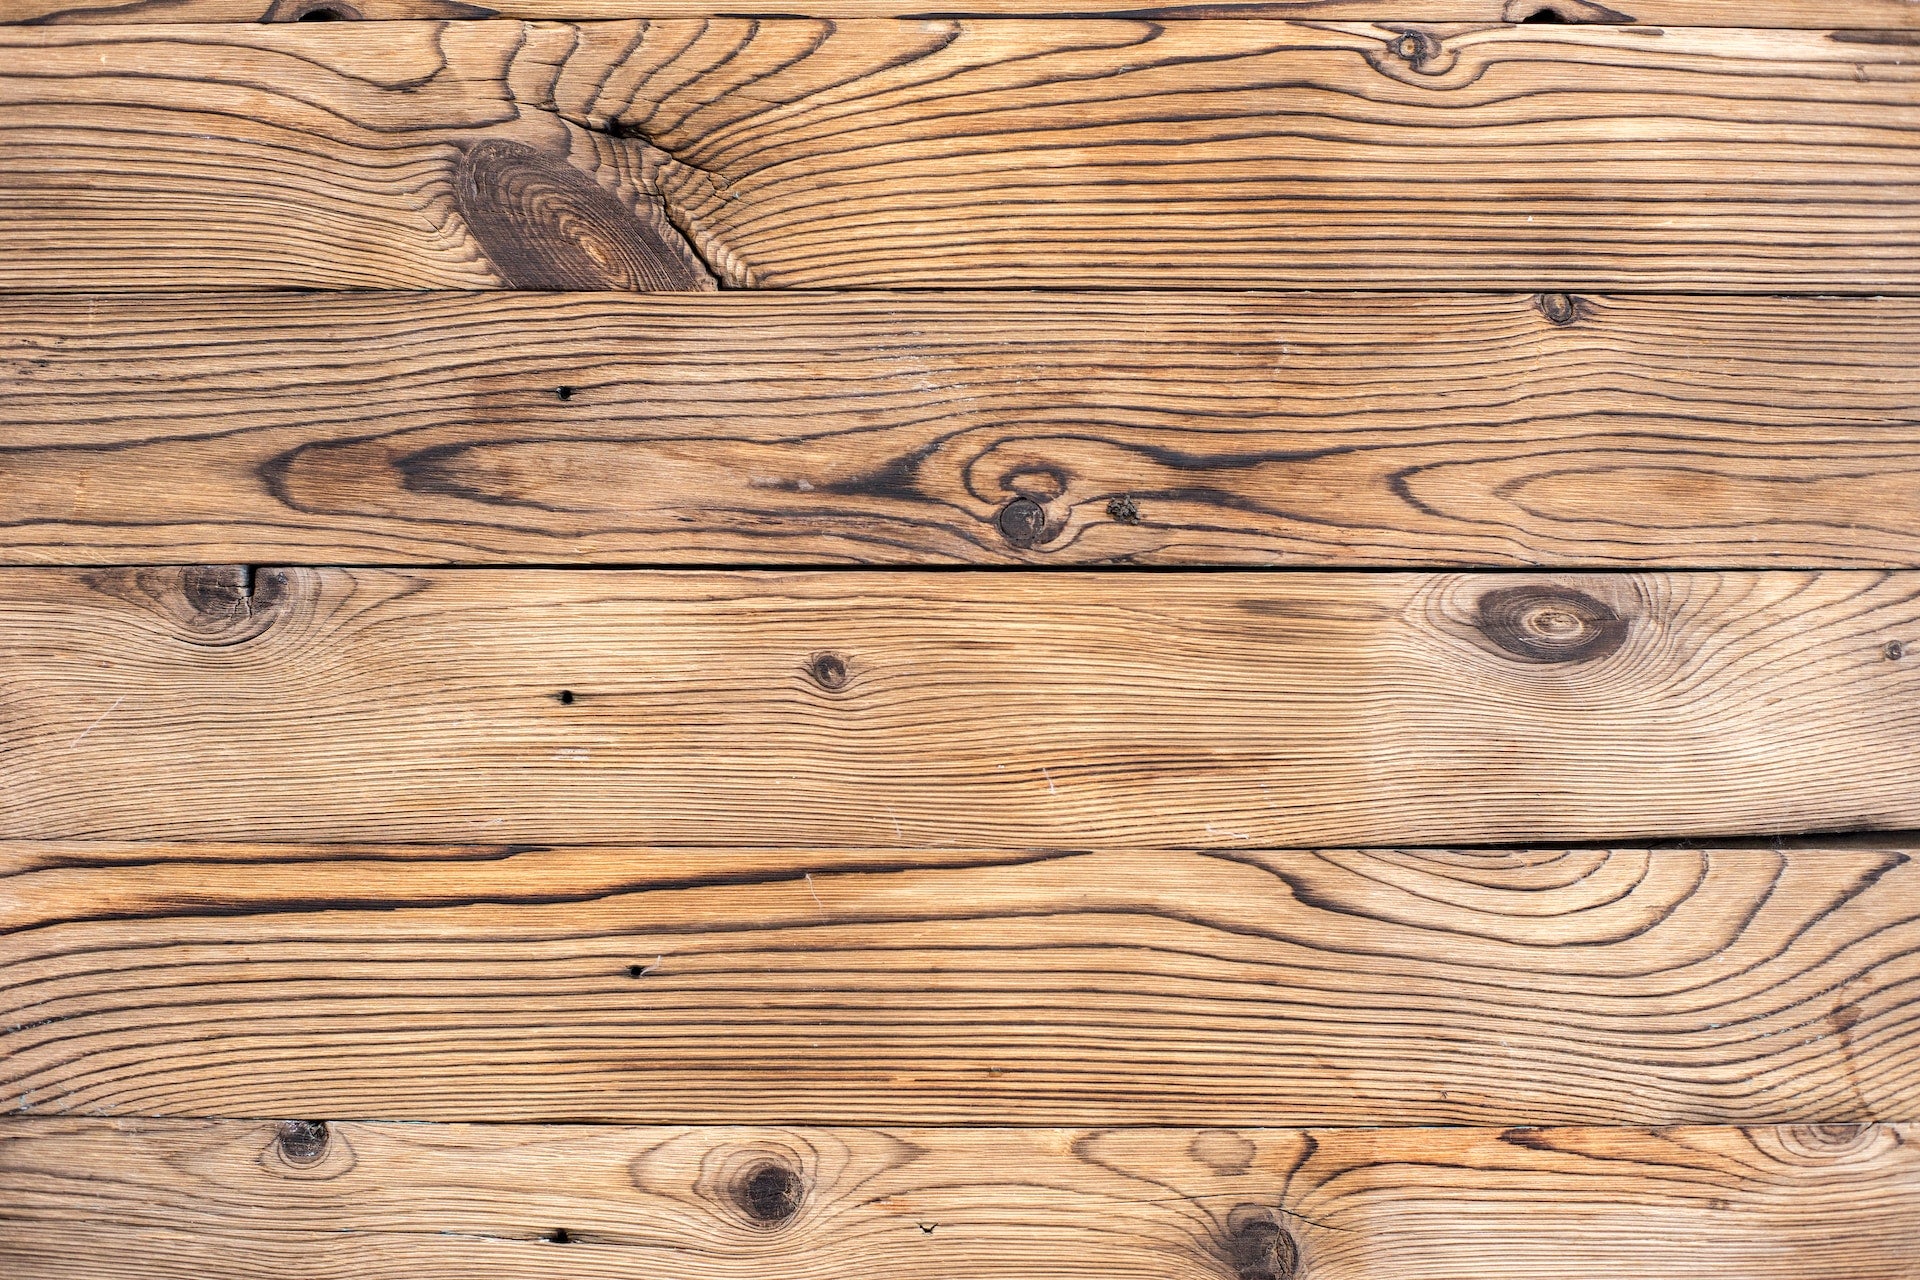 How to Remove Stains on Wood